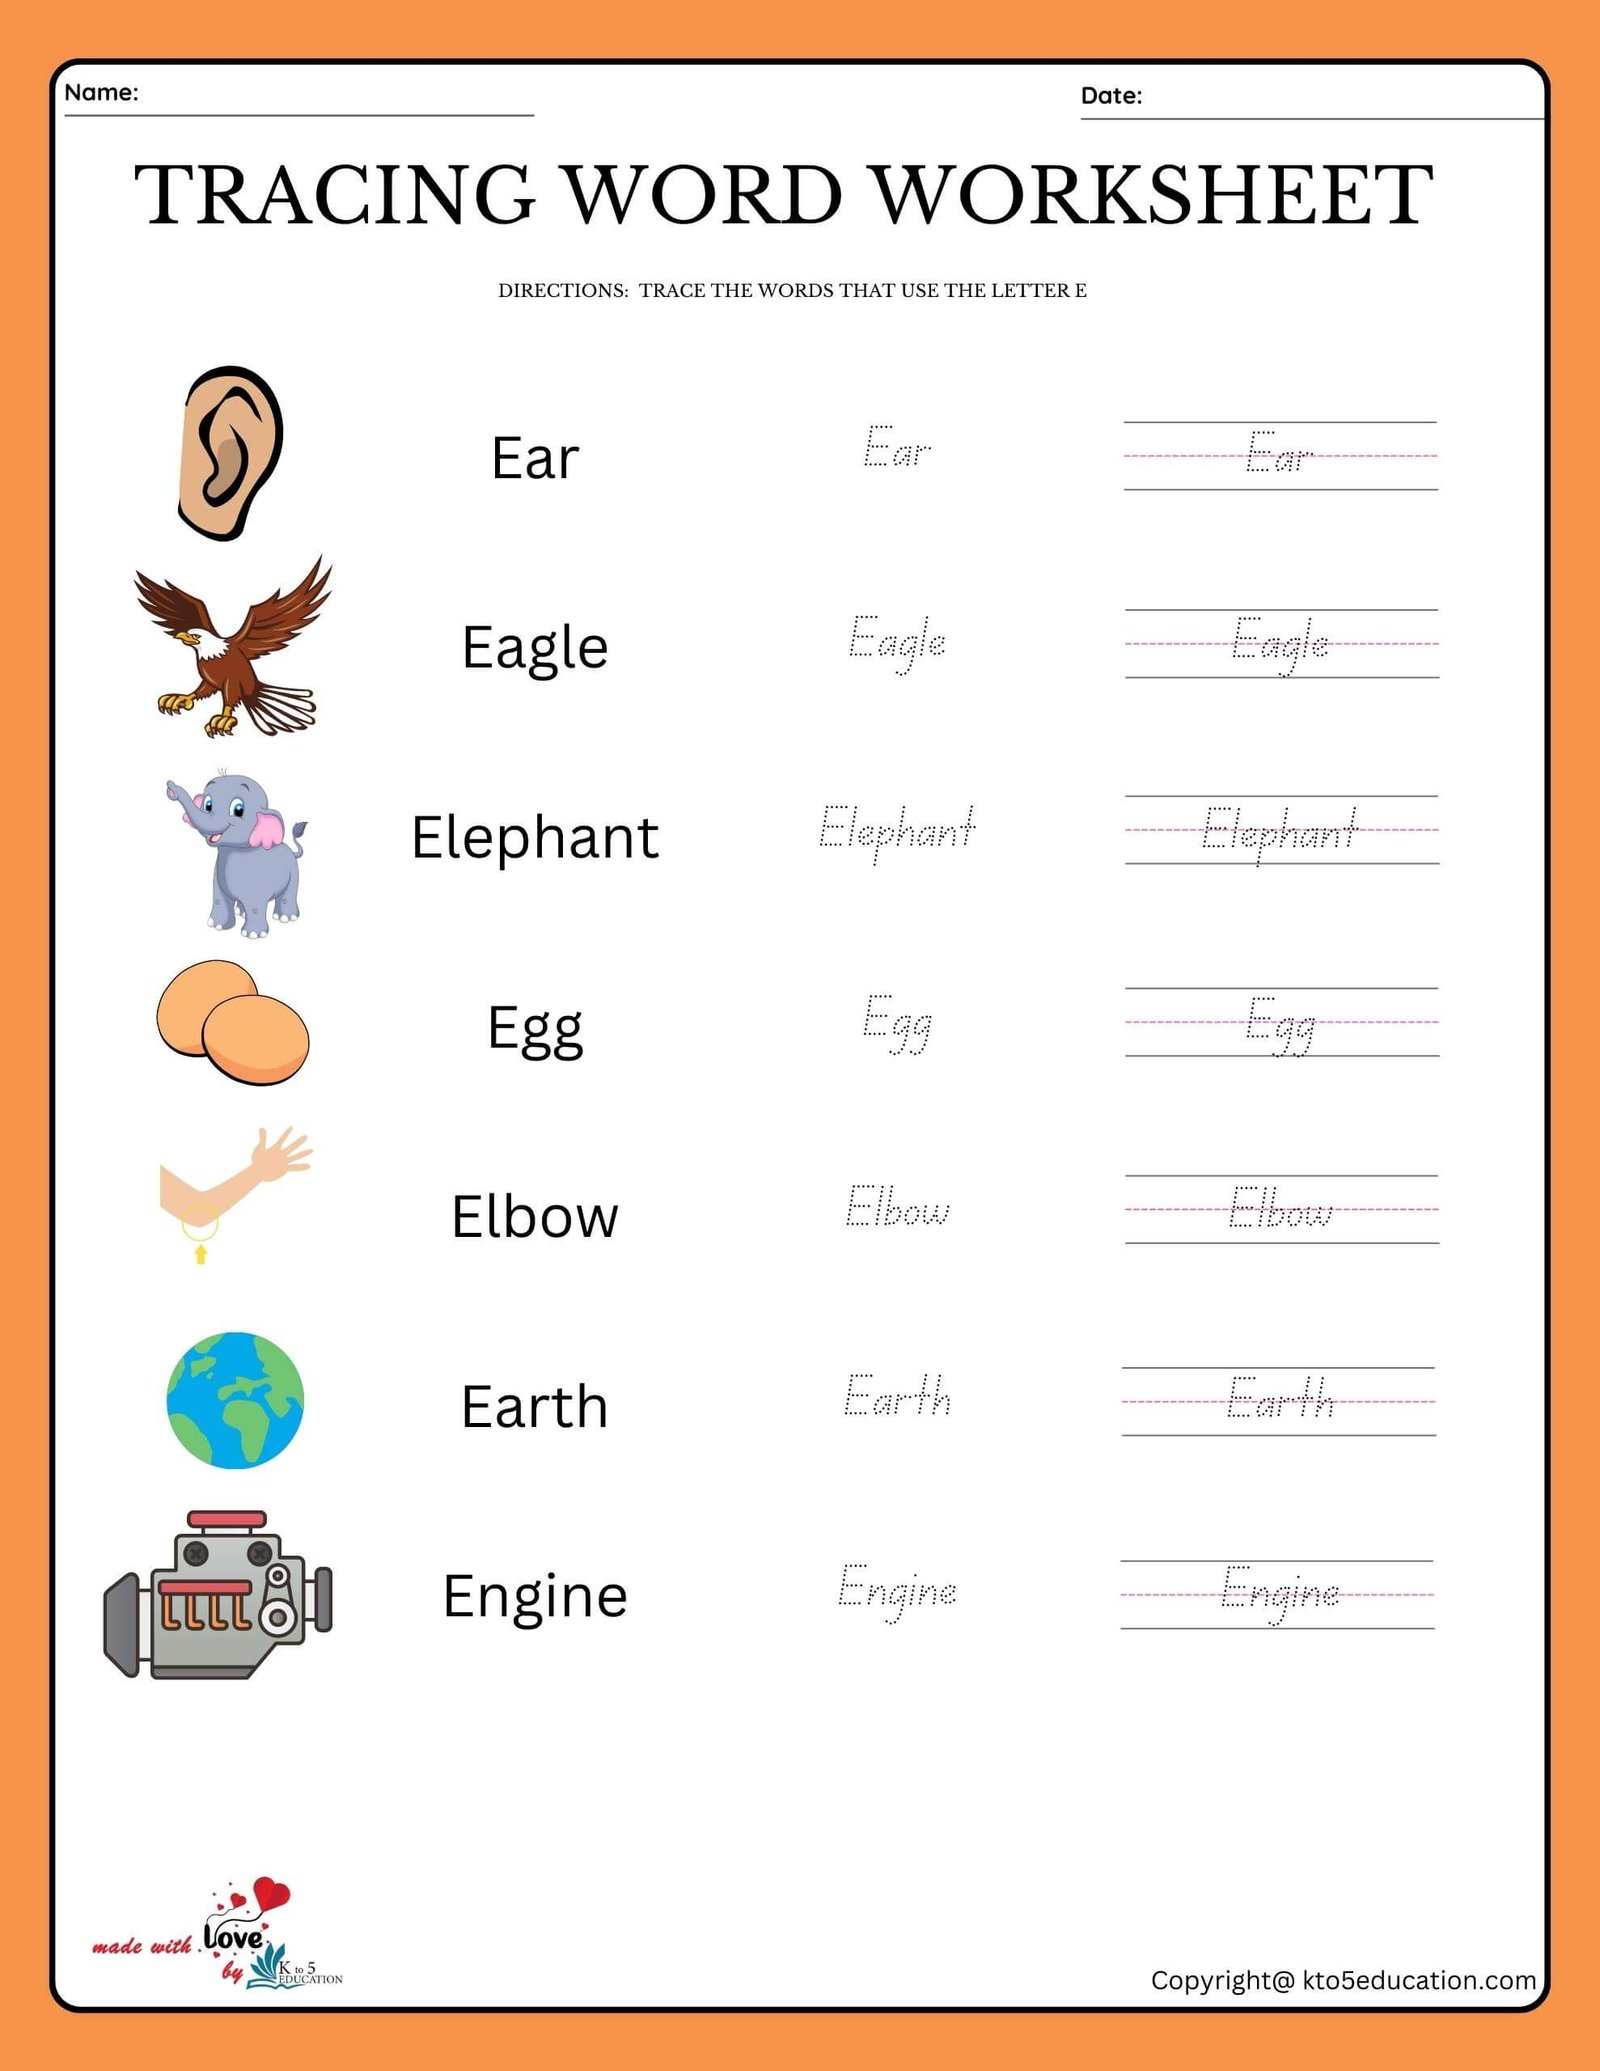 Trace The Words That Use The Letter E Worksheet